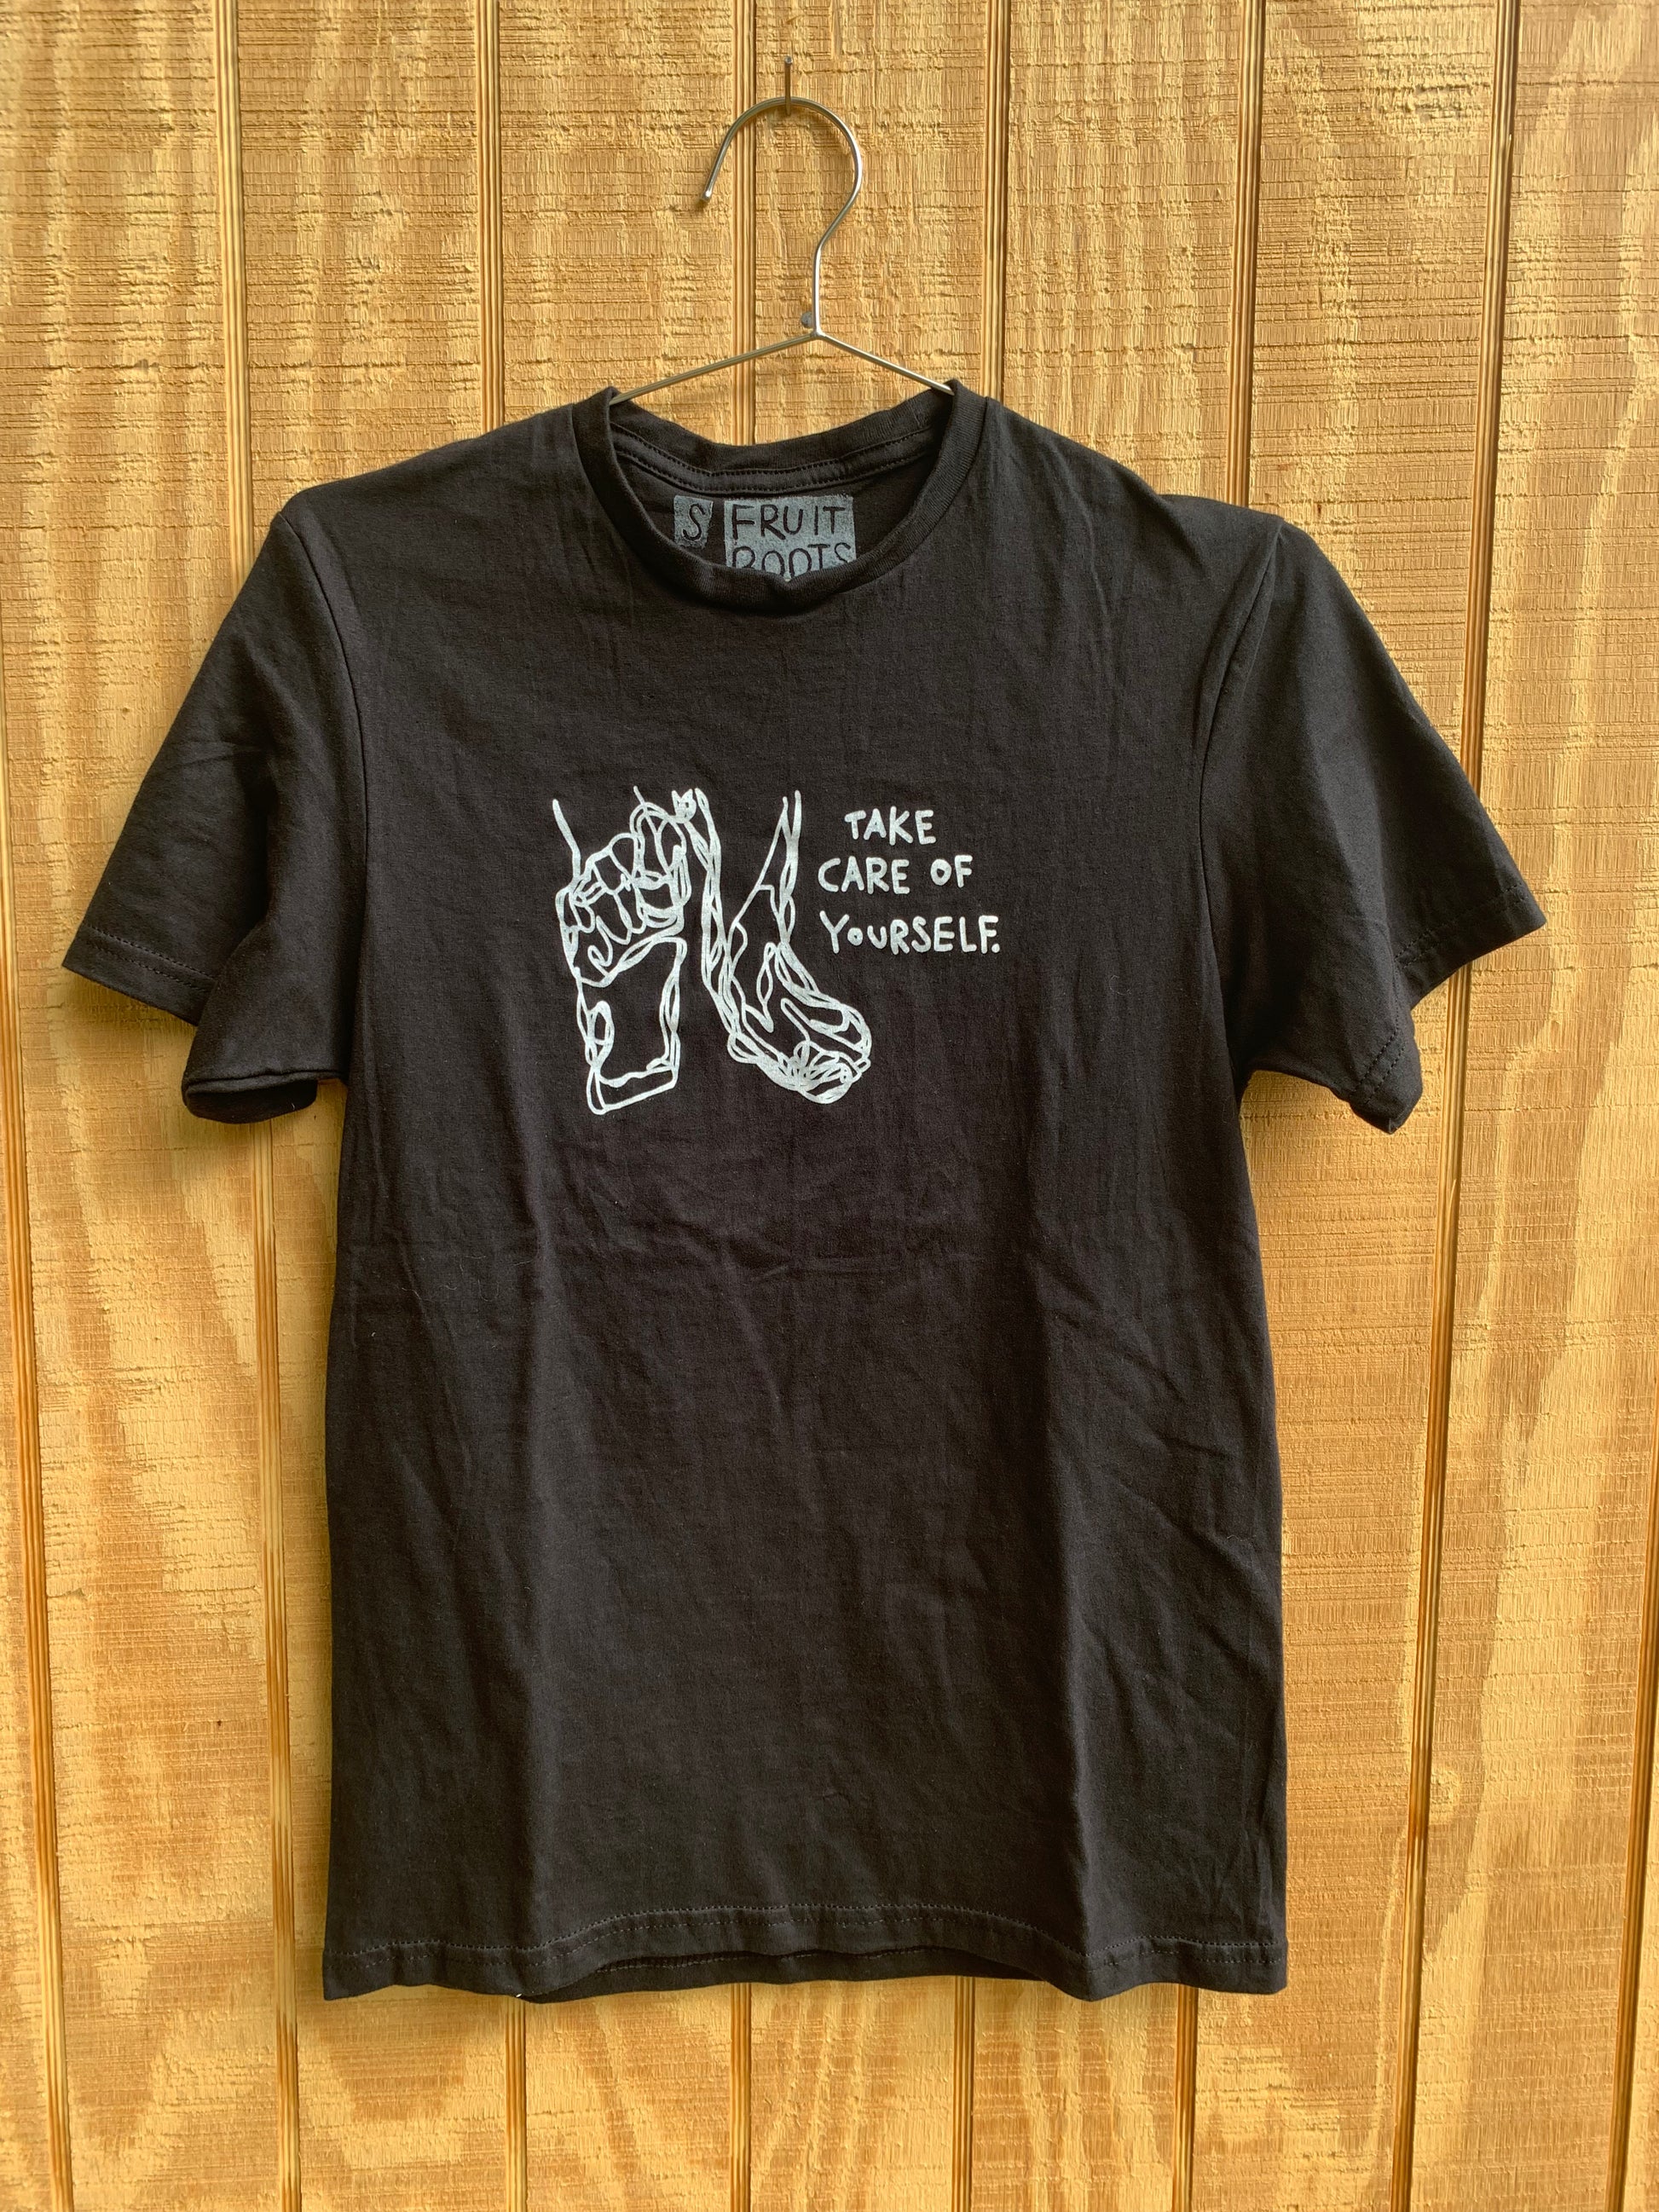 Black T Shirt with white blind contour drawing of feet and white text that reads "take care of yourself"